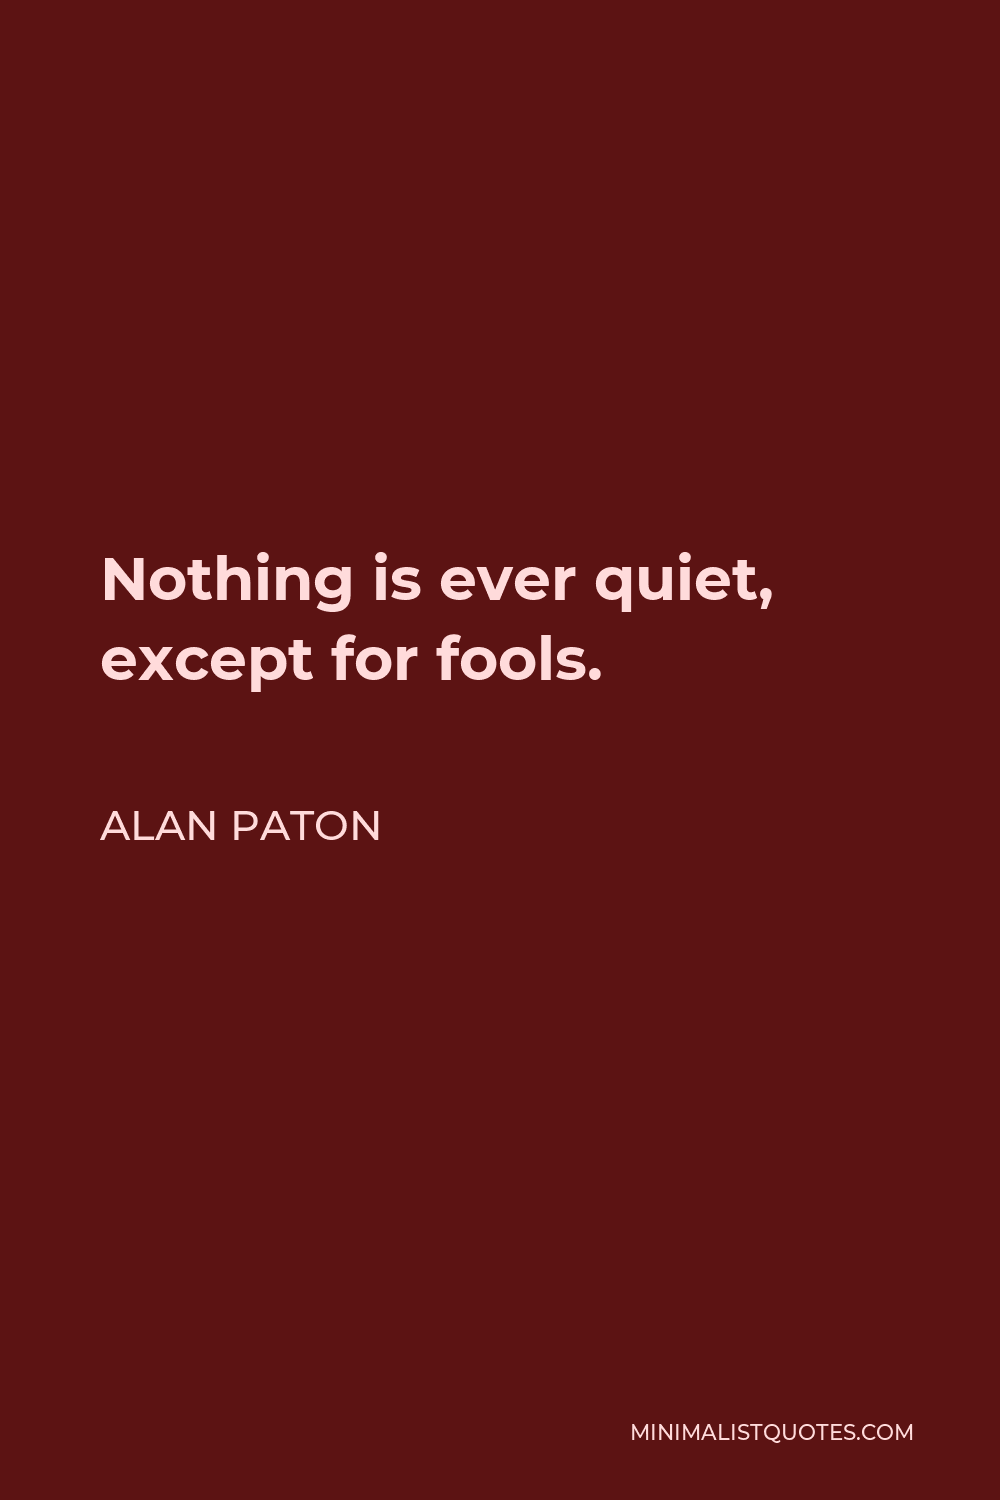 Alan Paton Quote - Nothing is ever quiet, except for fools.